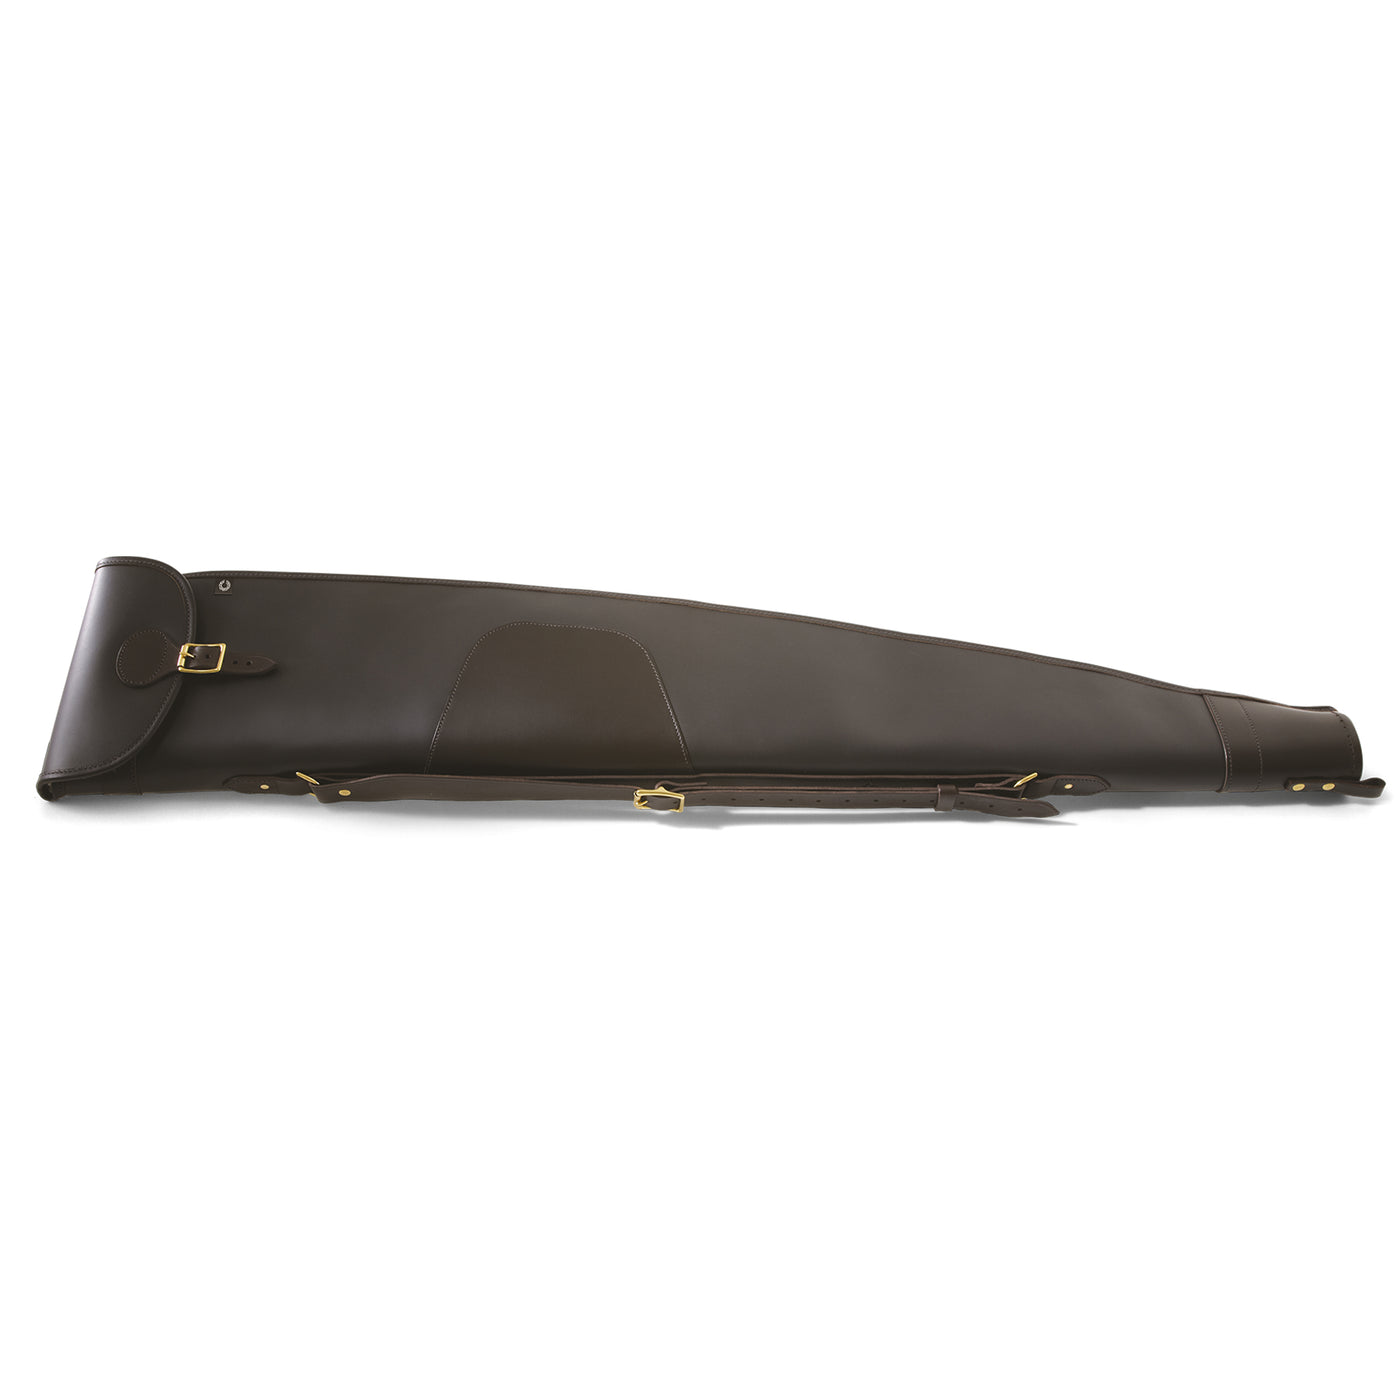 Byland Bipod Rifle Slip With Flap and Zip